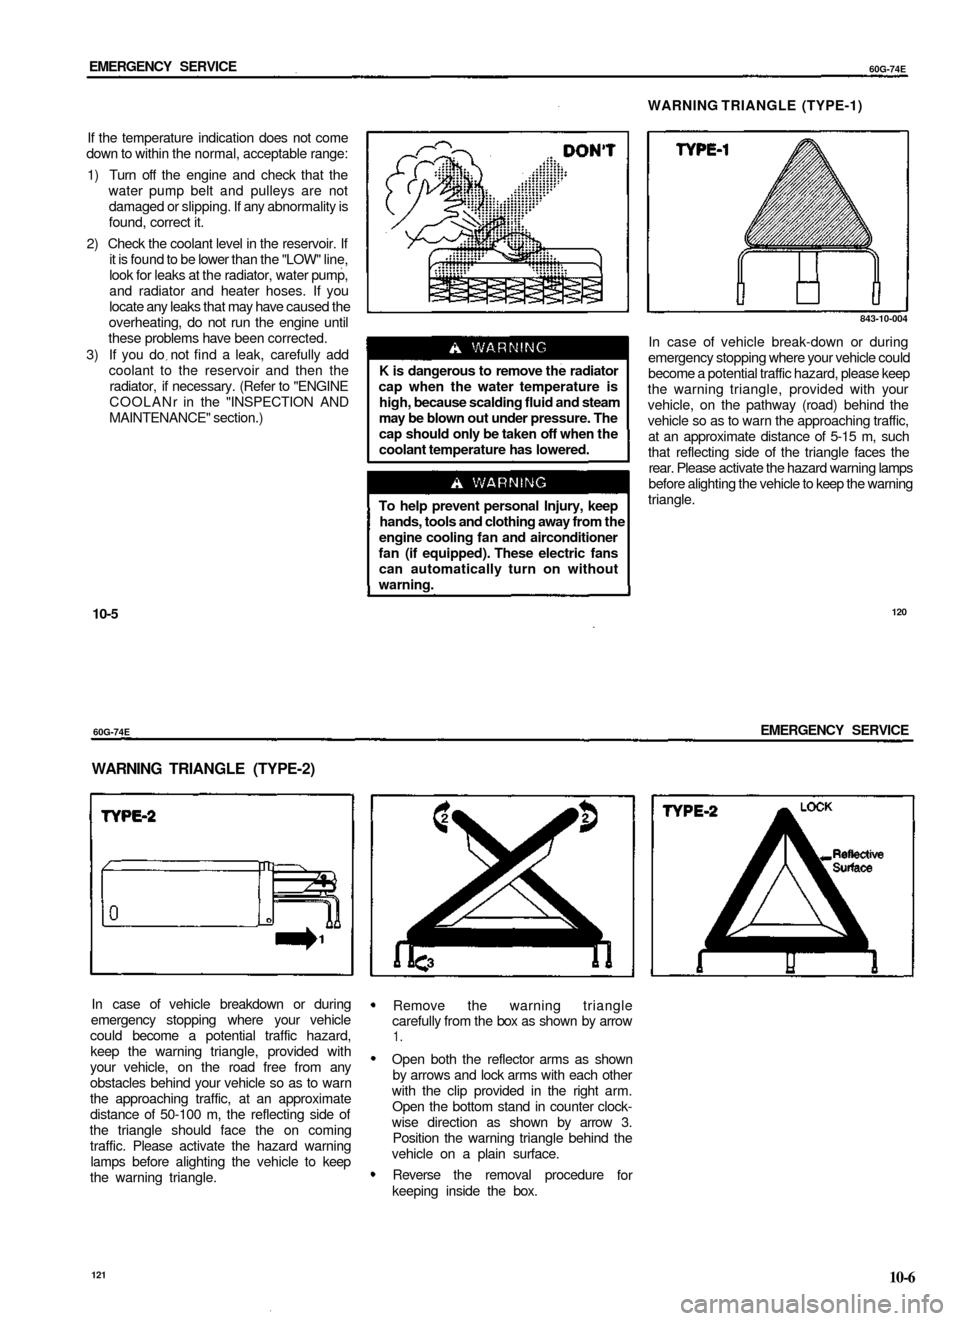 SUZUKI BALENO 1999 1.G User Guide 
EMERGENCY SERVICE

60G-74E

WARNING TRIANGLE (TYPE-1)

If the temperature indication does not come

down to within the normal, acceptable range:

1) Turn off the engine and check that the

water pump